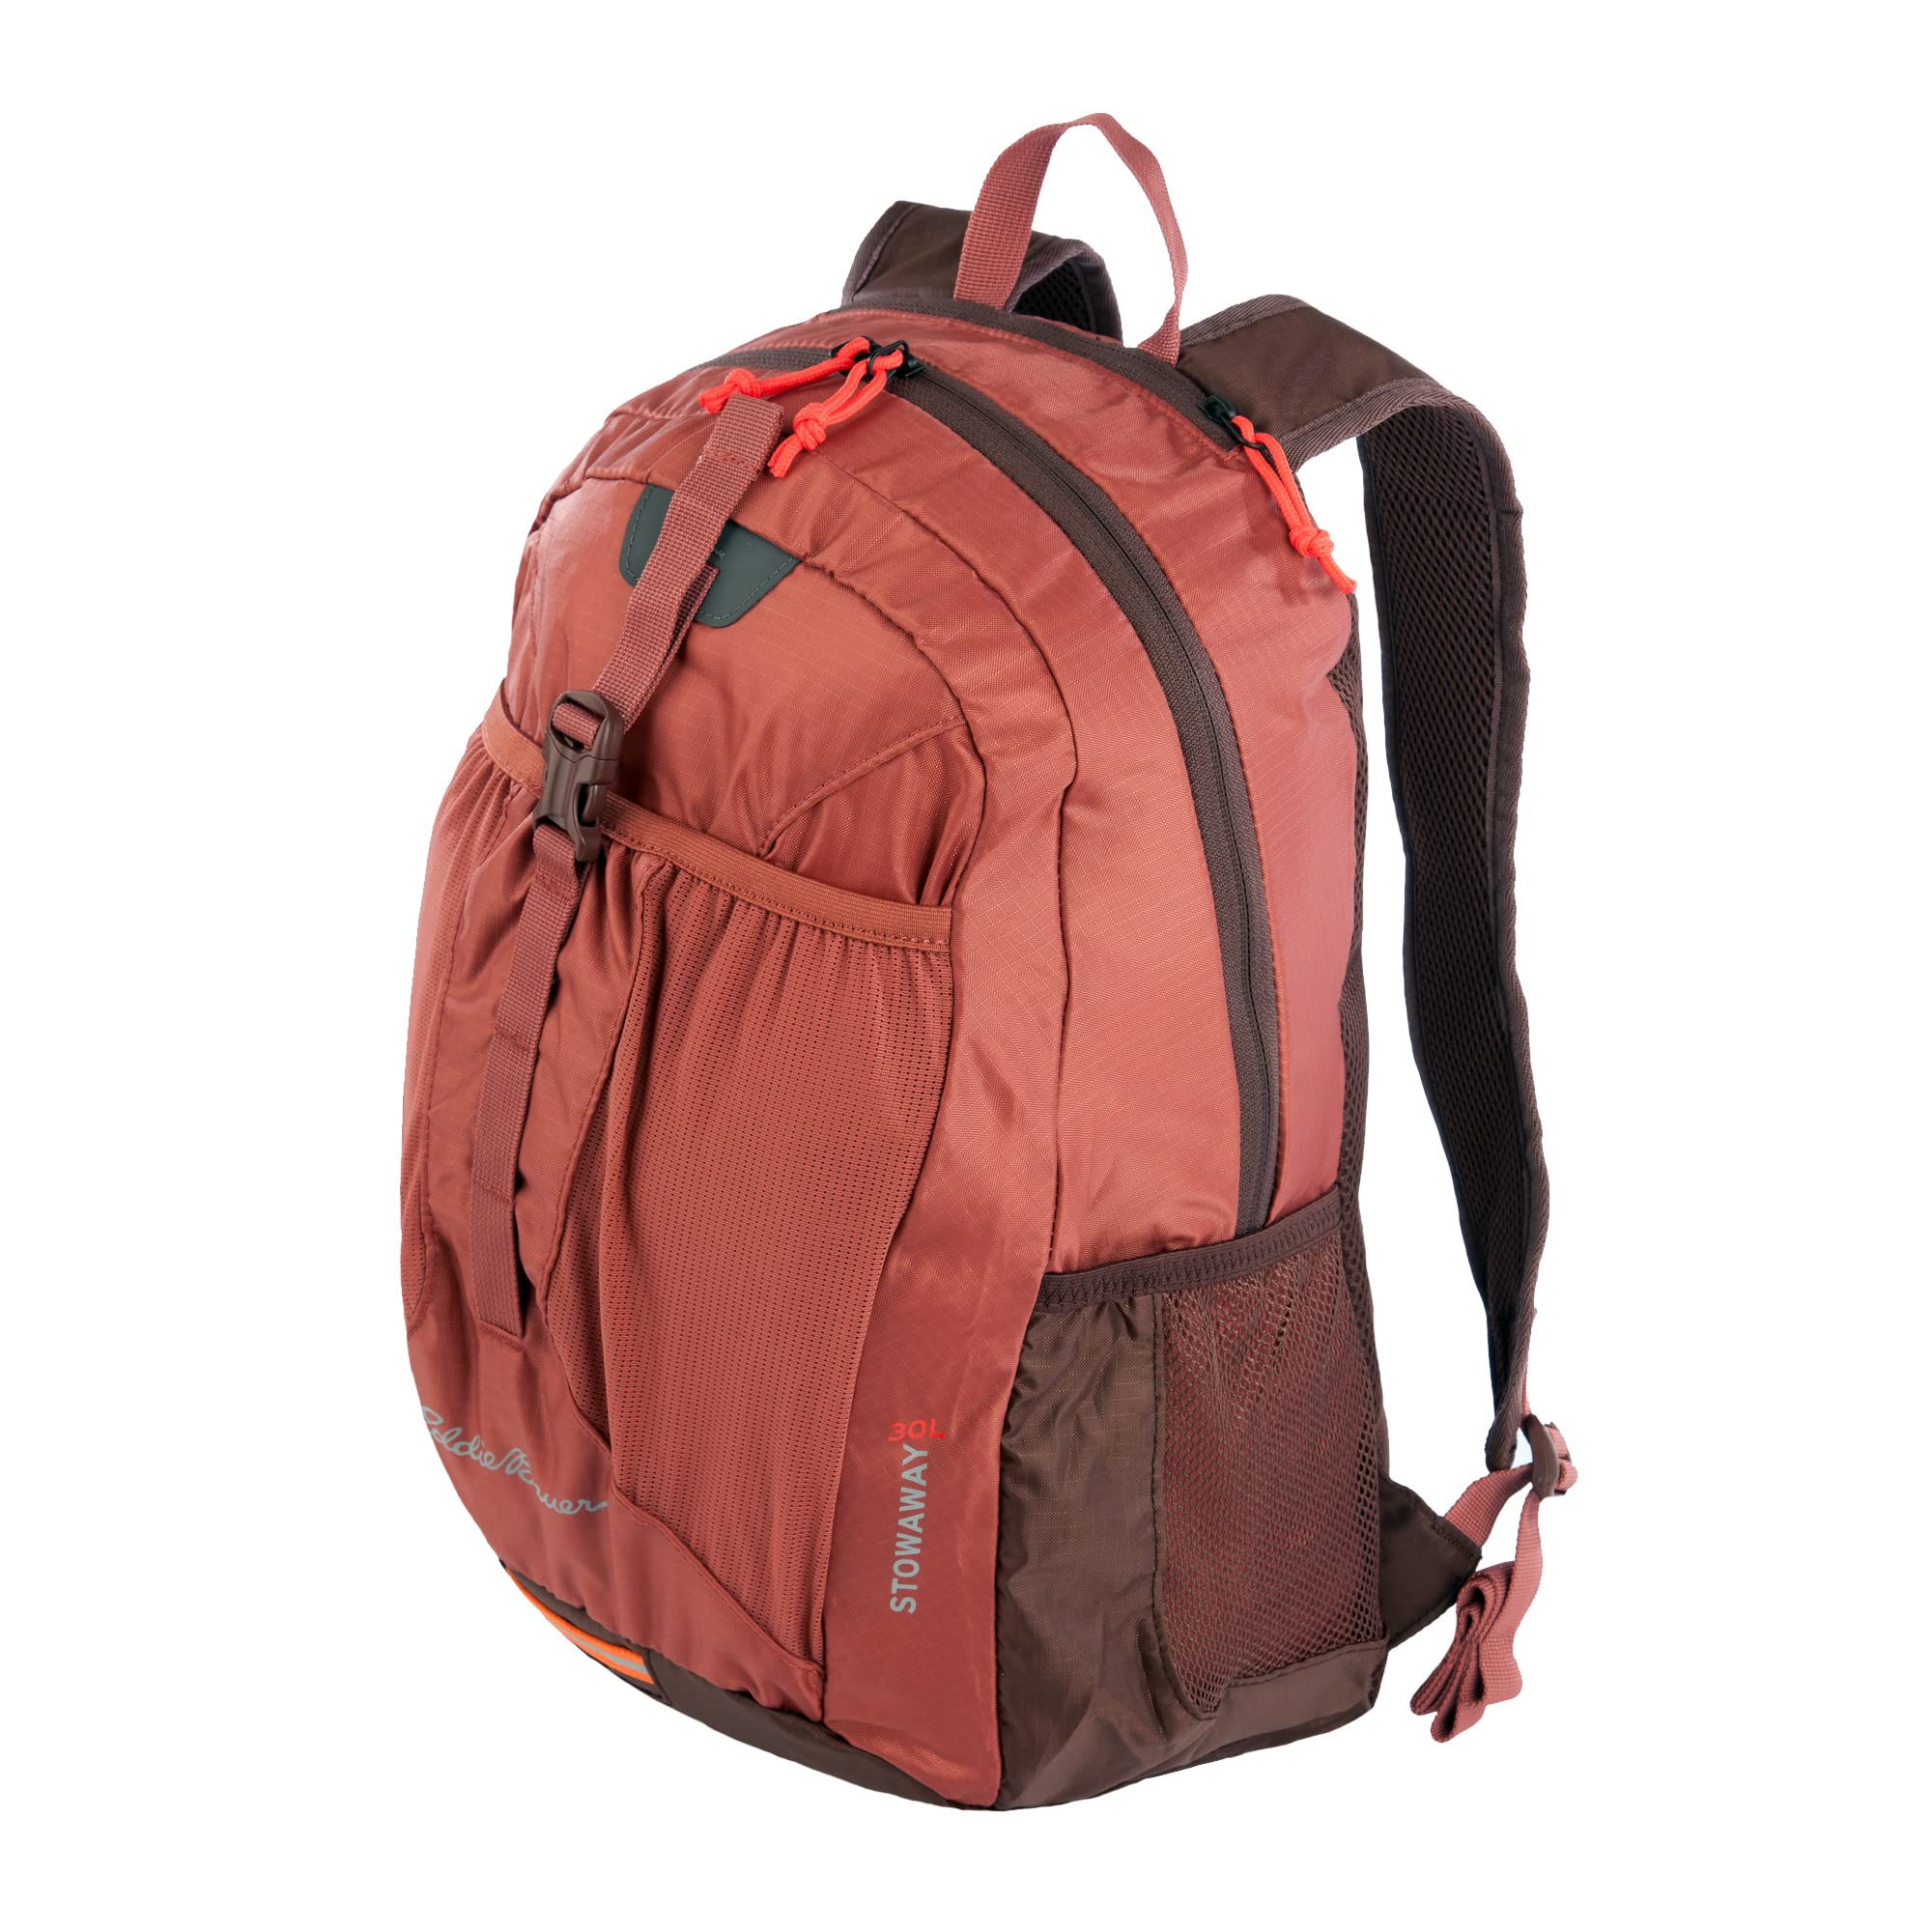 Eddie Bauer Stowaway Packable Backpack 30L with Water Resistant Finish and 2 Mesh Side Pockets, Maroon, One Size